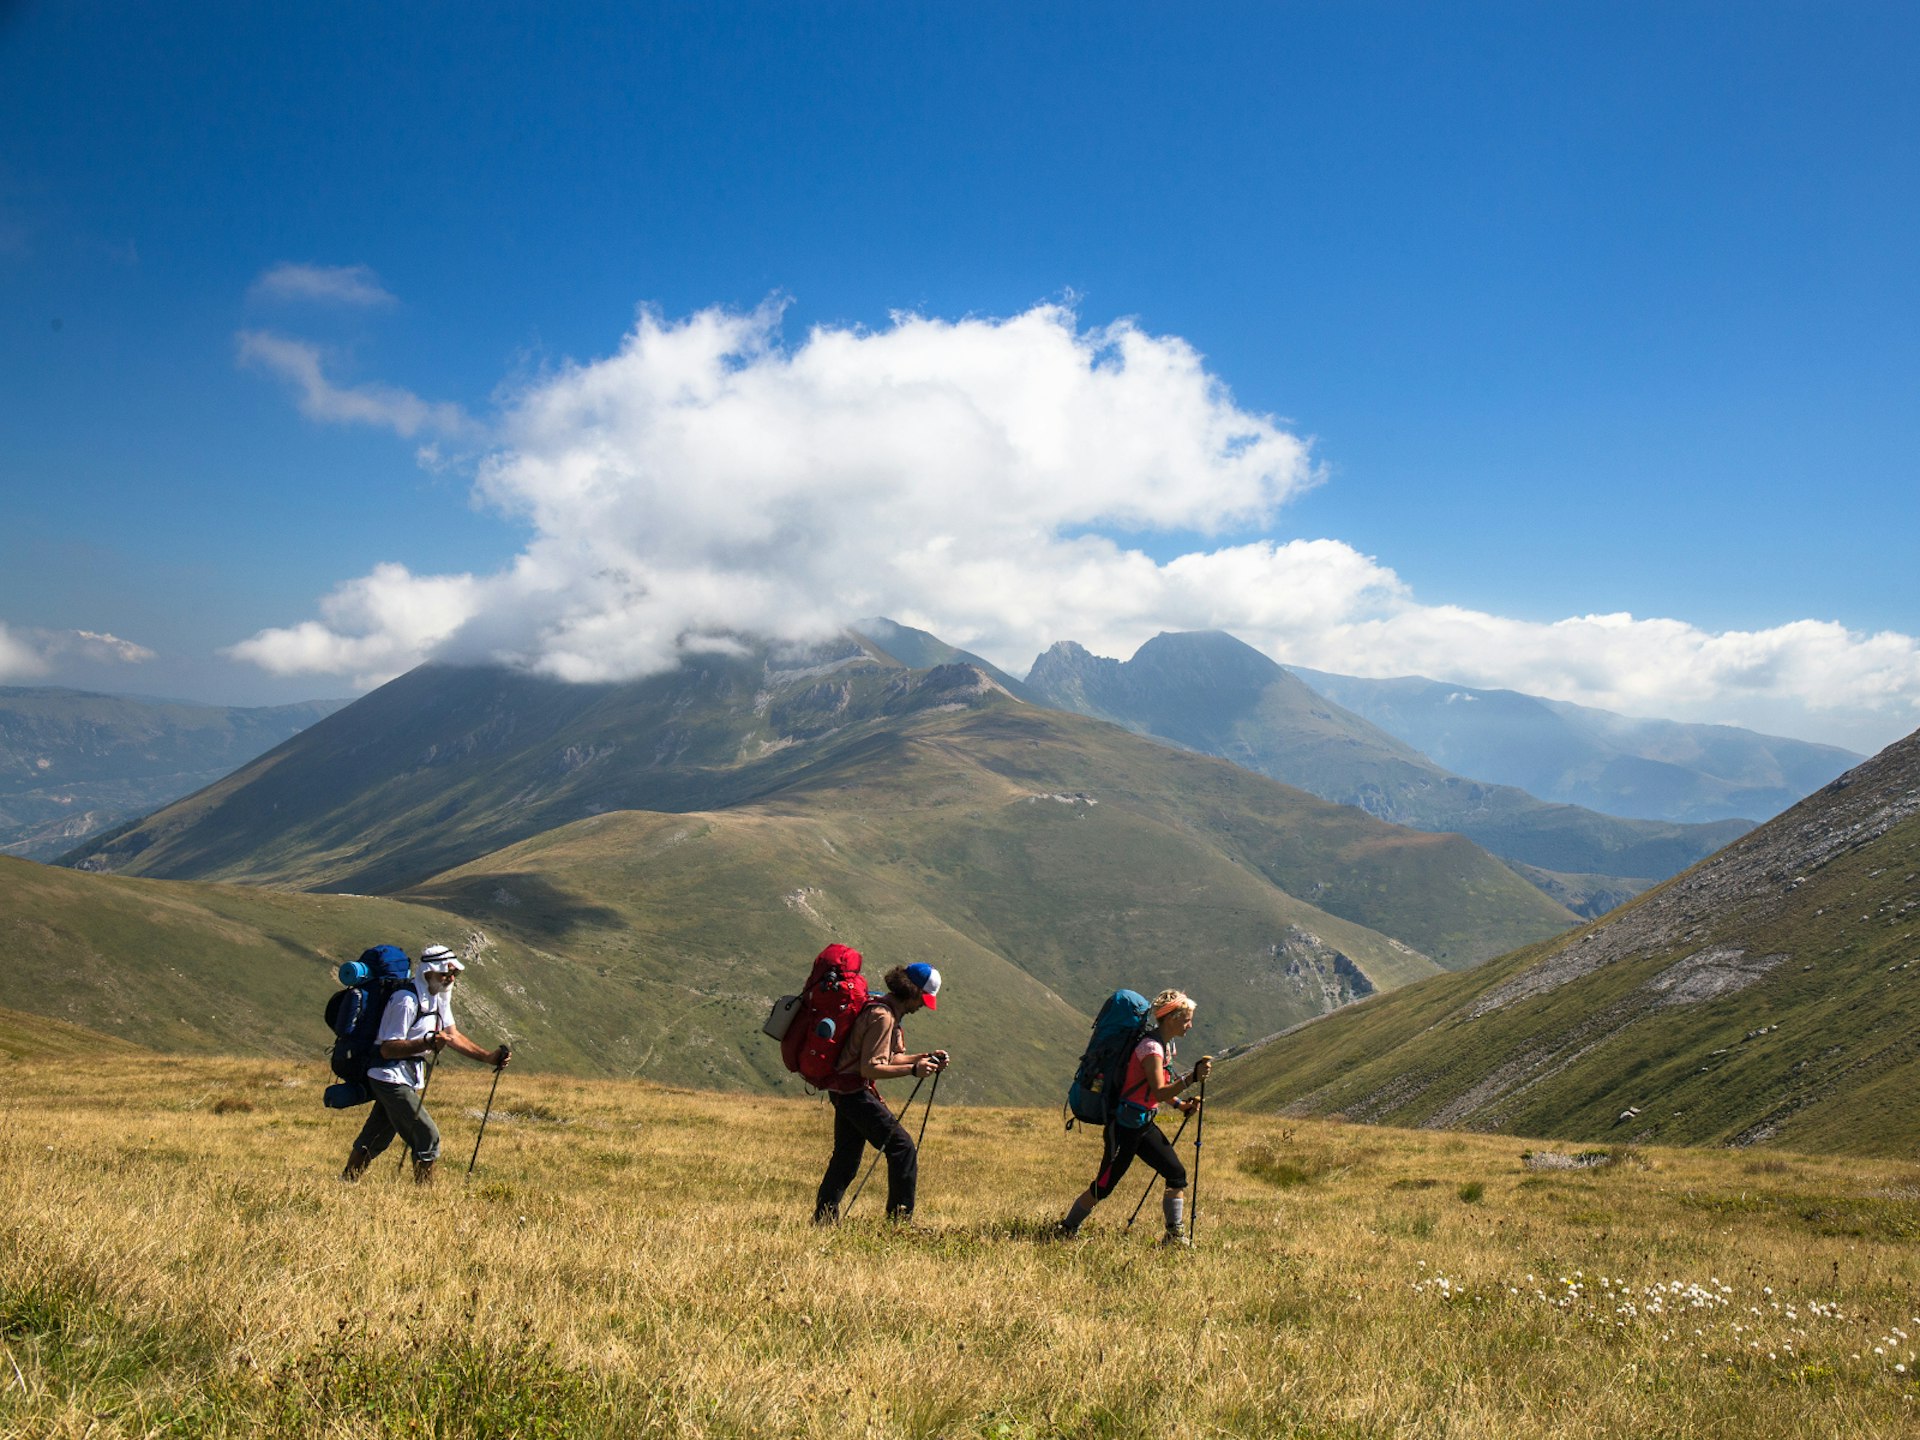 On the trail in Šar Mountain, with Vrtop pass and Kobilica (2528m) in the background © Aleksandar Donev / Lonely Planet